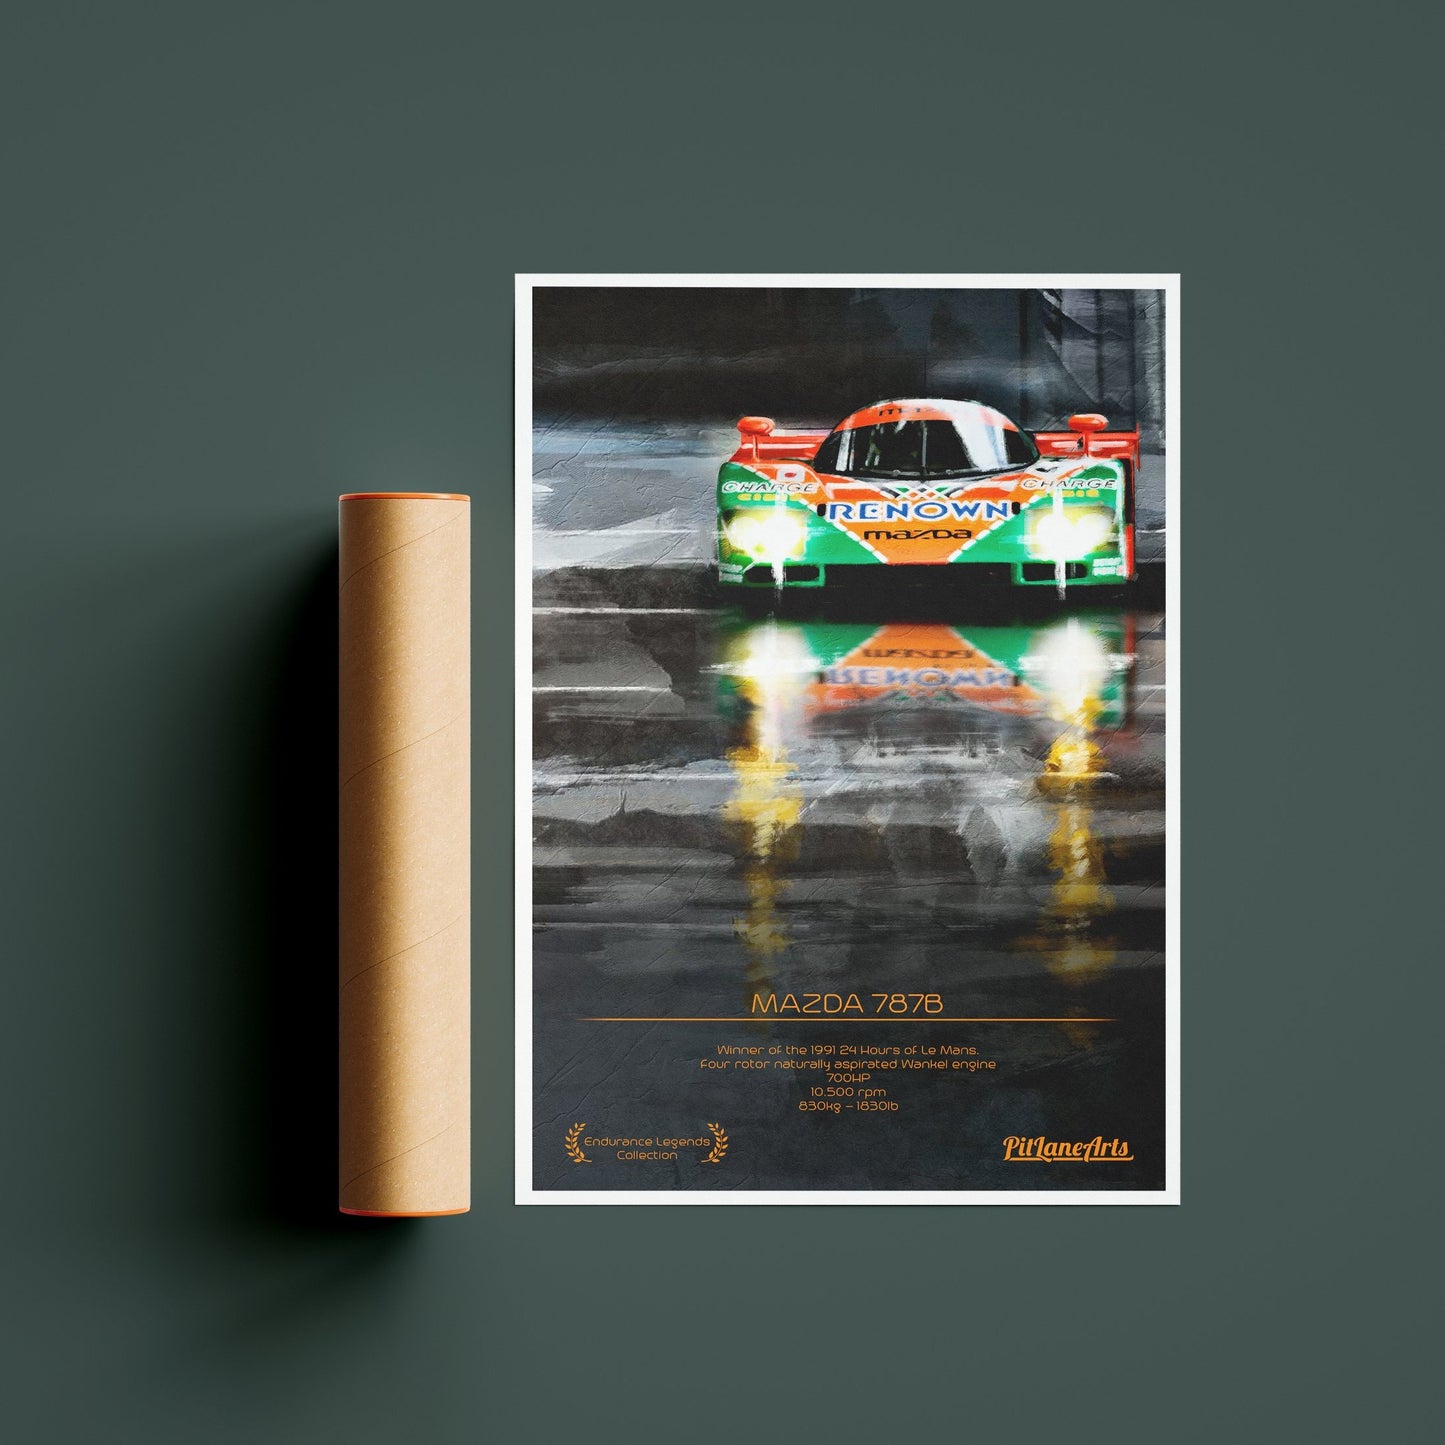 Mazda 787 B Le Mans race car Poster print with delivery tube - PitLaneArts